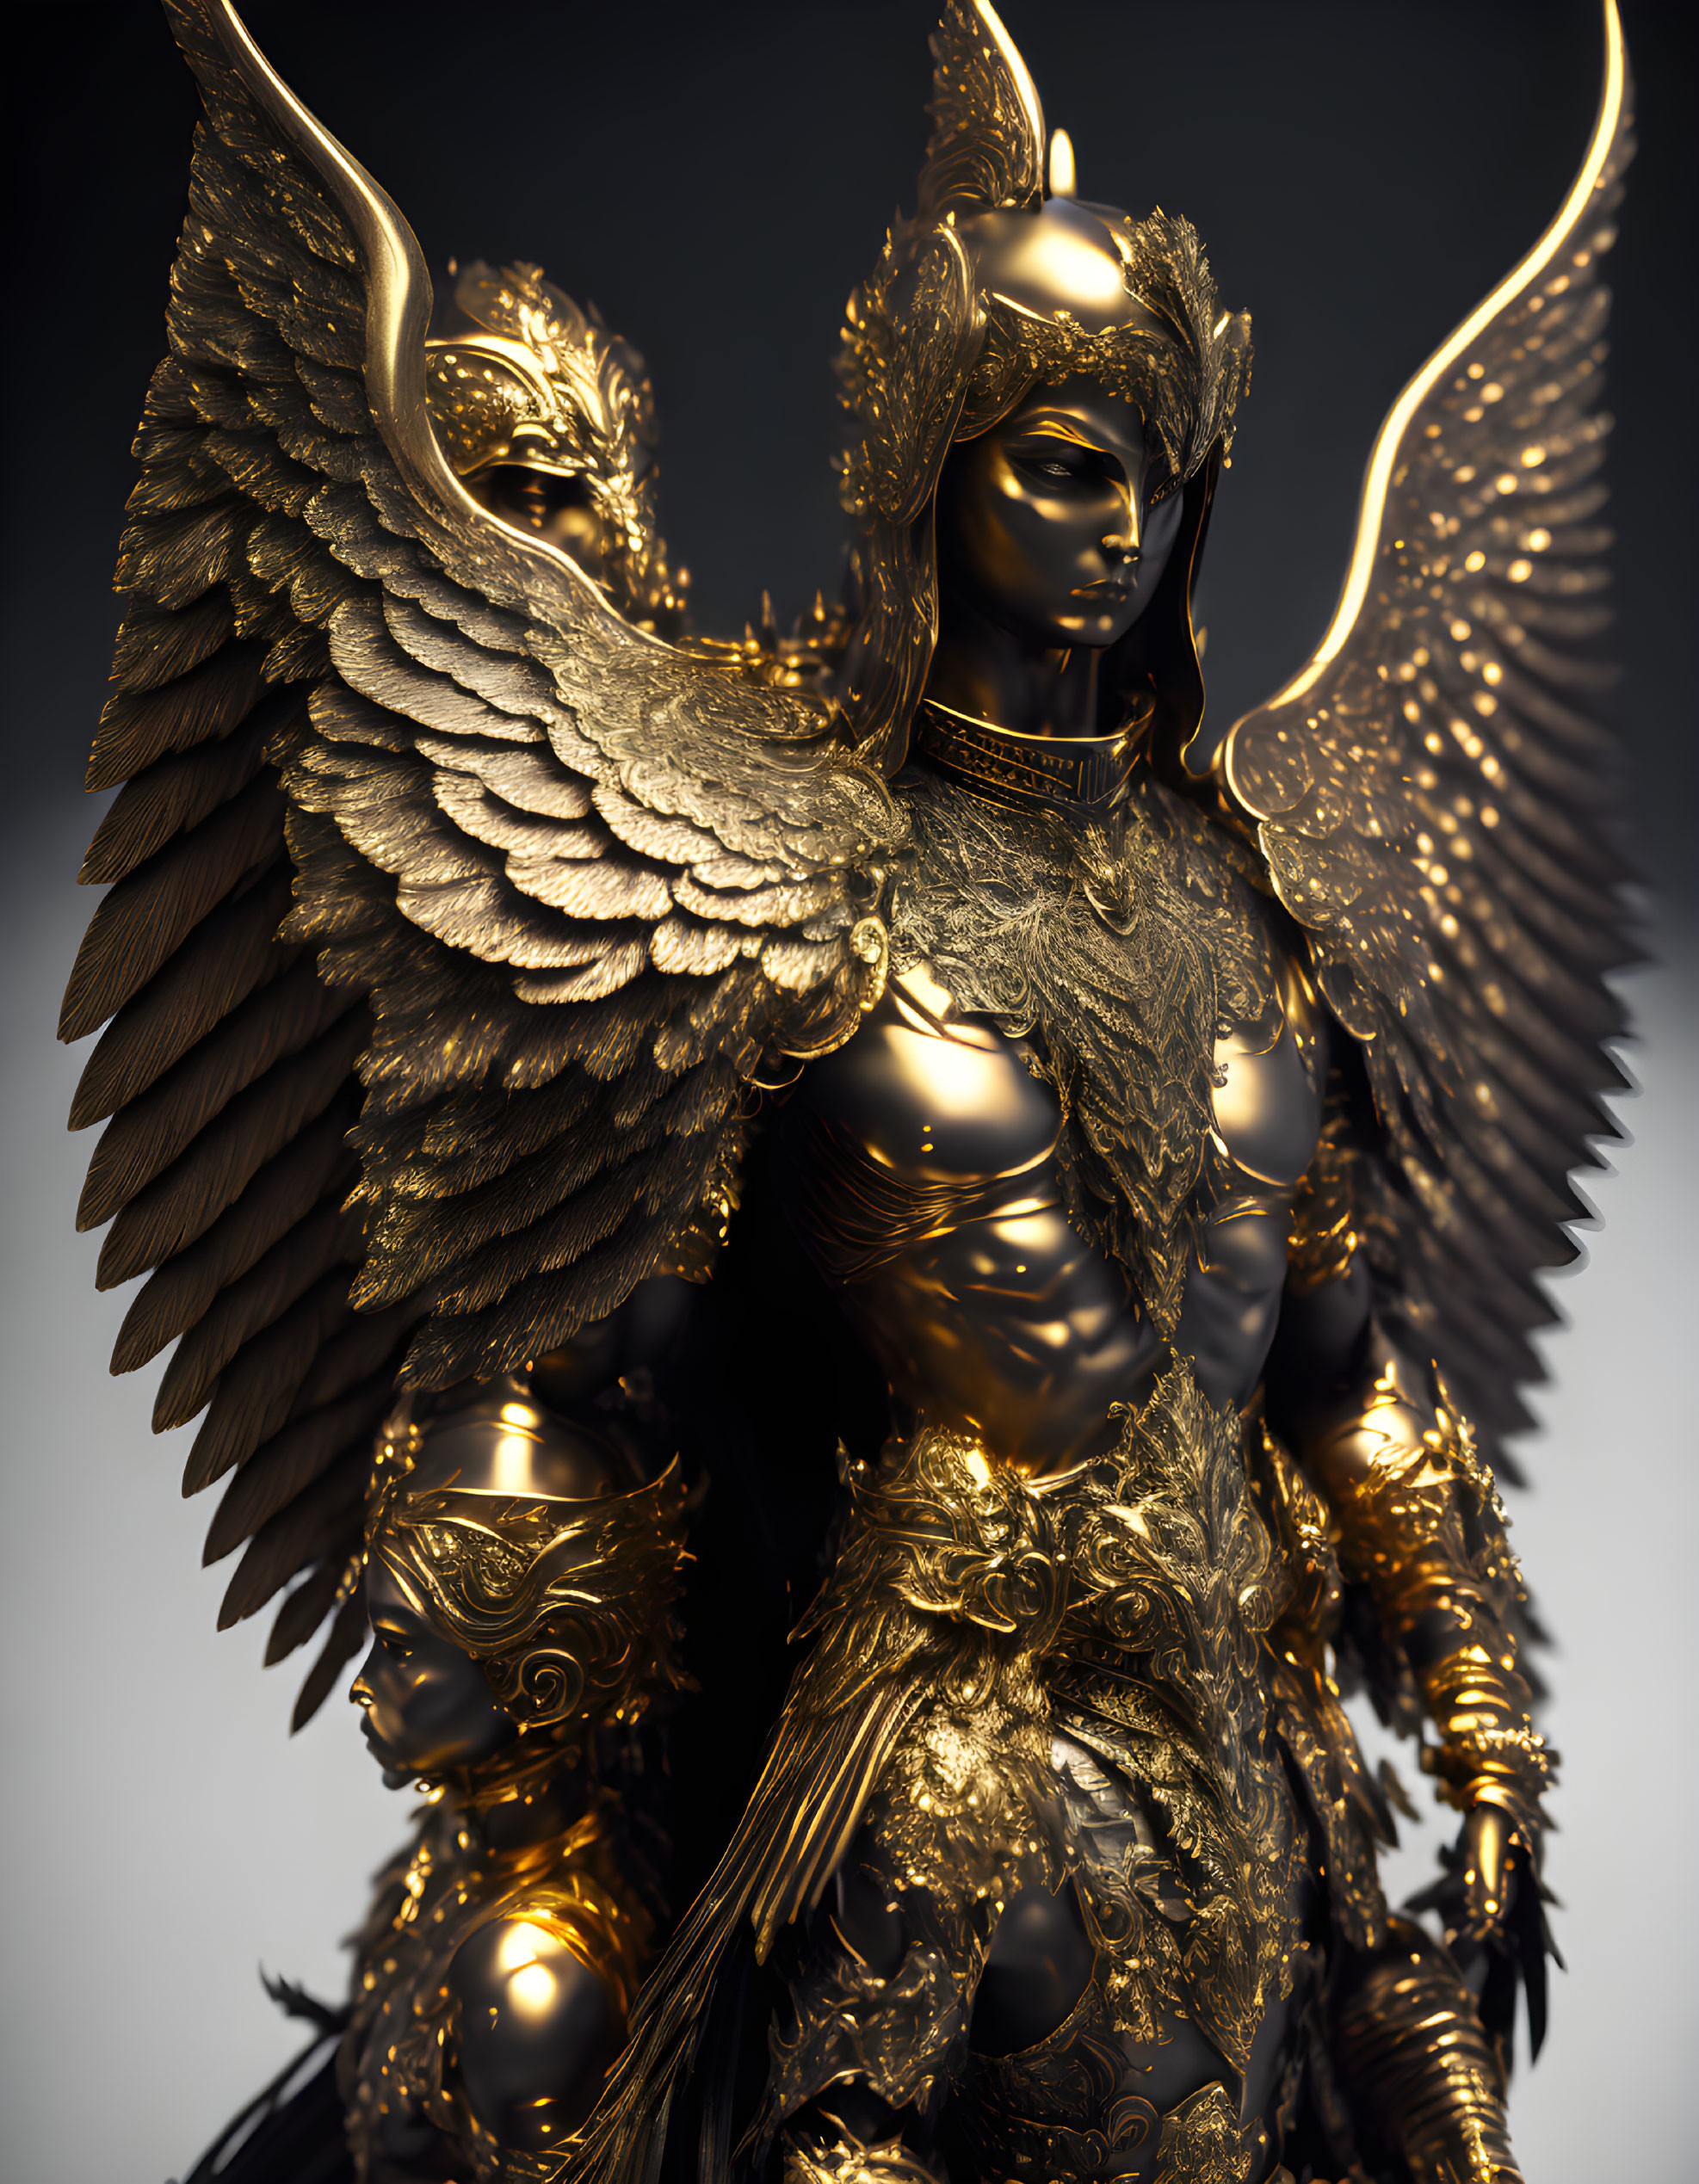 Golden Armored Figure with Wings and Horned Helmet: Majestic and Regal Essence